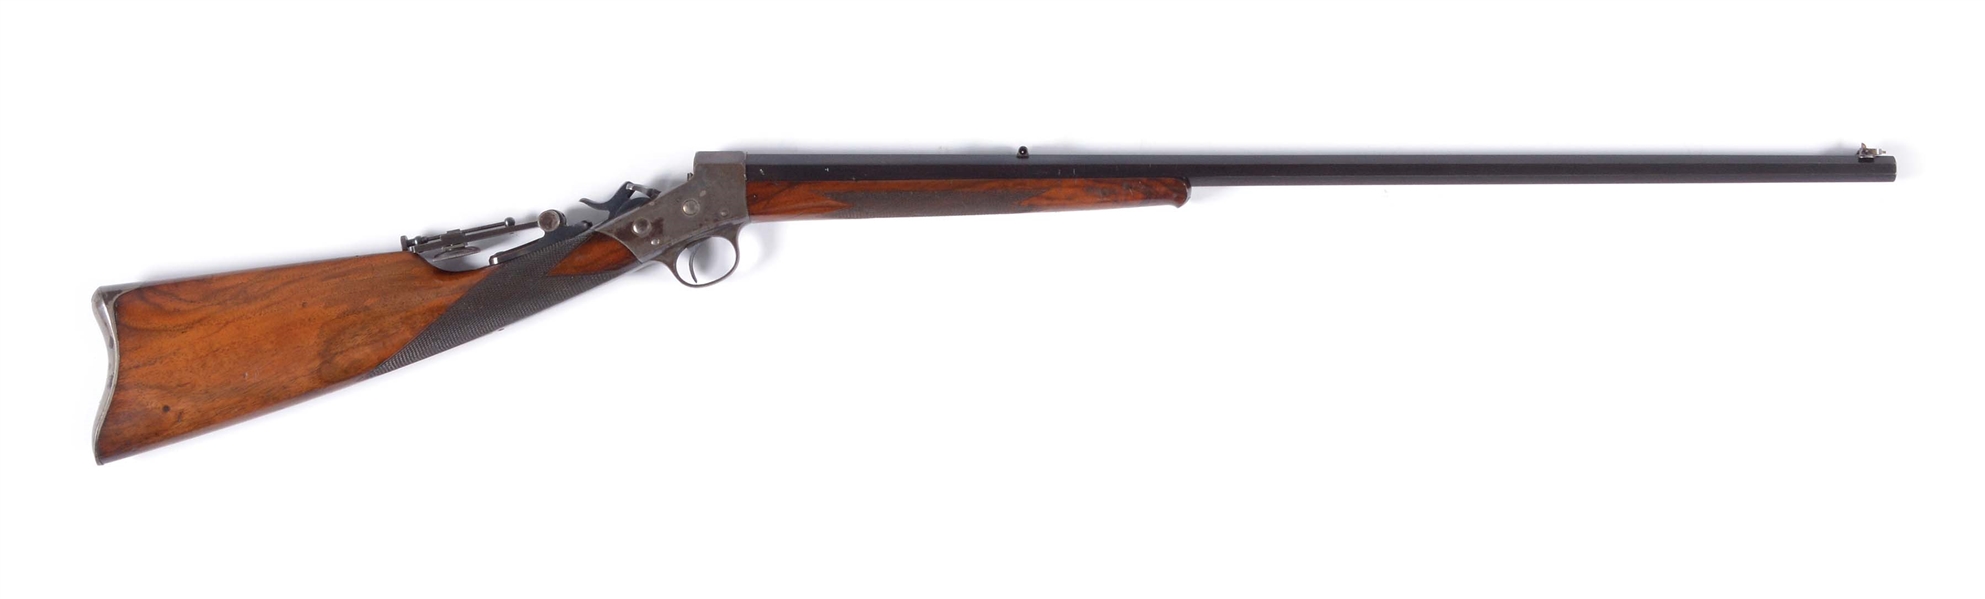 (A) REMINGTON NO. 2 DELUXE TARGET RIFLE.